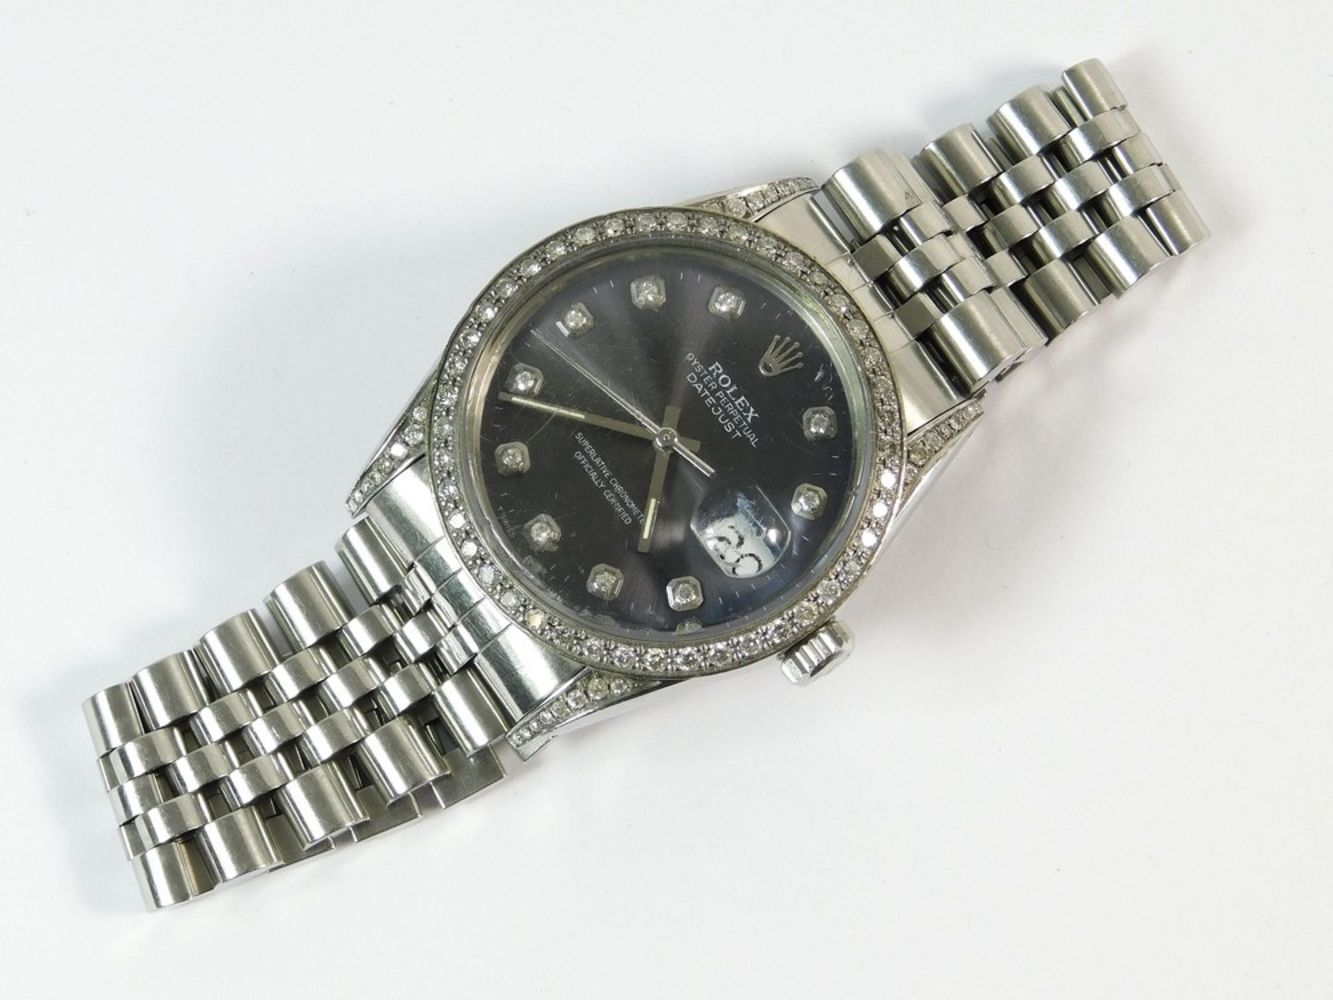 AUCTION OF JEWELLERY, SILVER, WATCHES, GOLD COINS, SMALL VALUABLES & COLLECTABLES